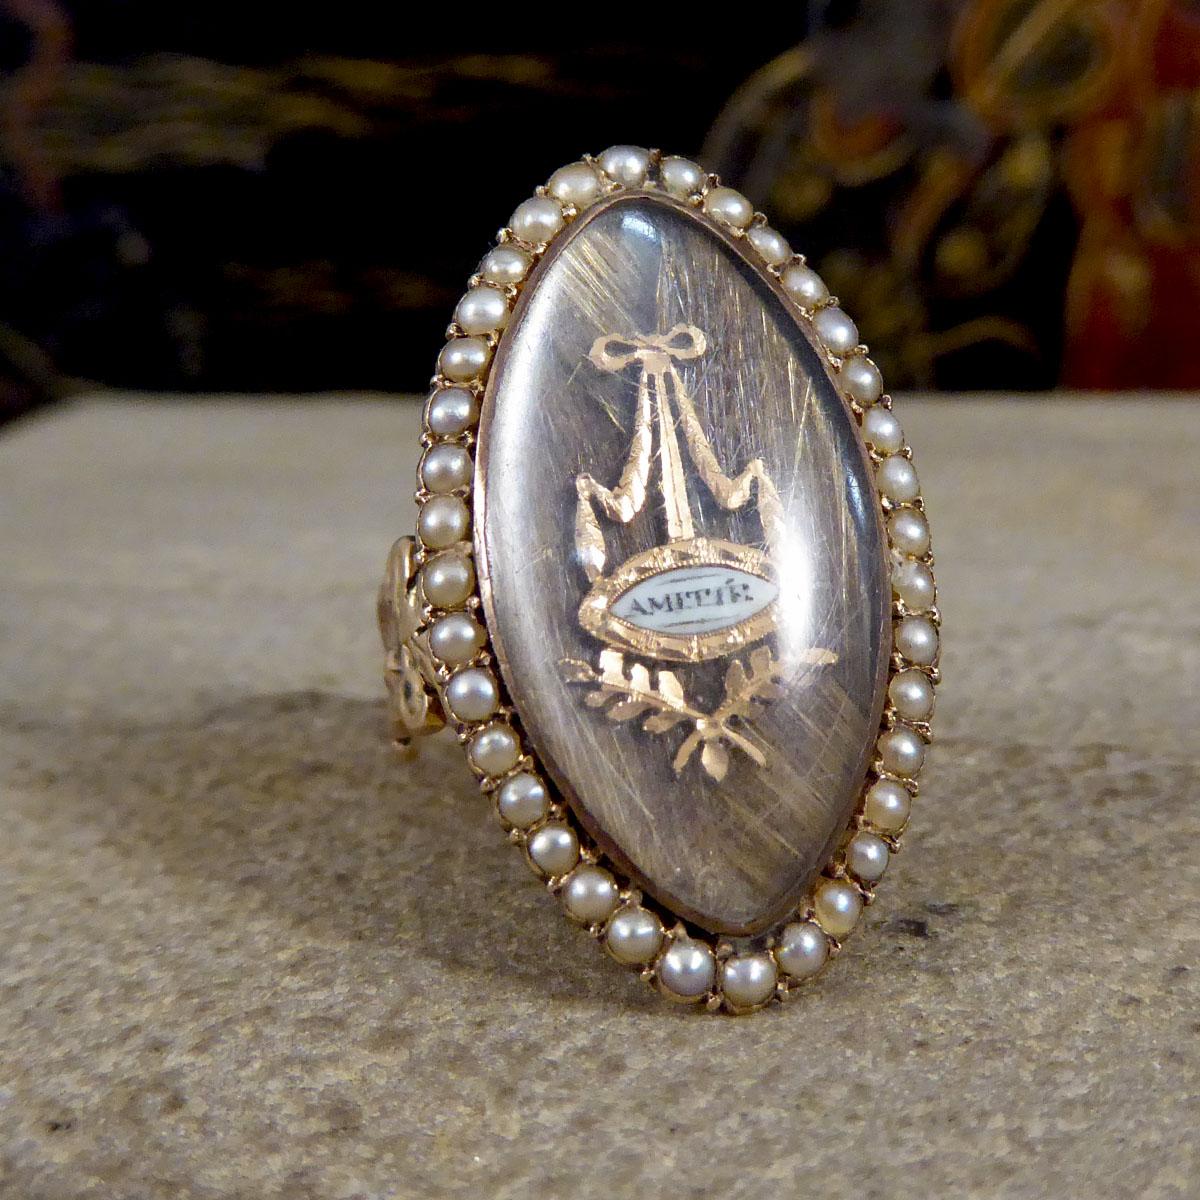 This ring is such an exquisite example of an antique memorial ring that was hand crafted in the Georgian era. This Georgian ring holds a lock of platted hair behind a glass cover in a marquise shape with the word 